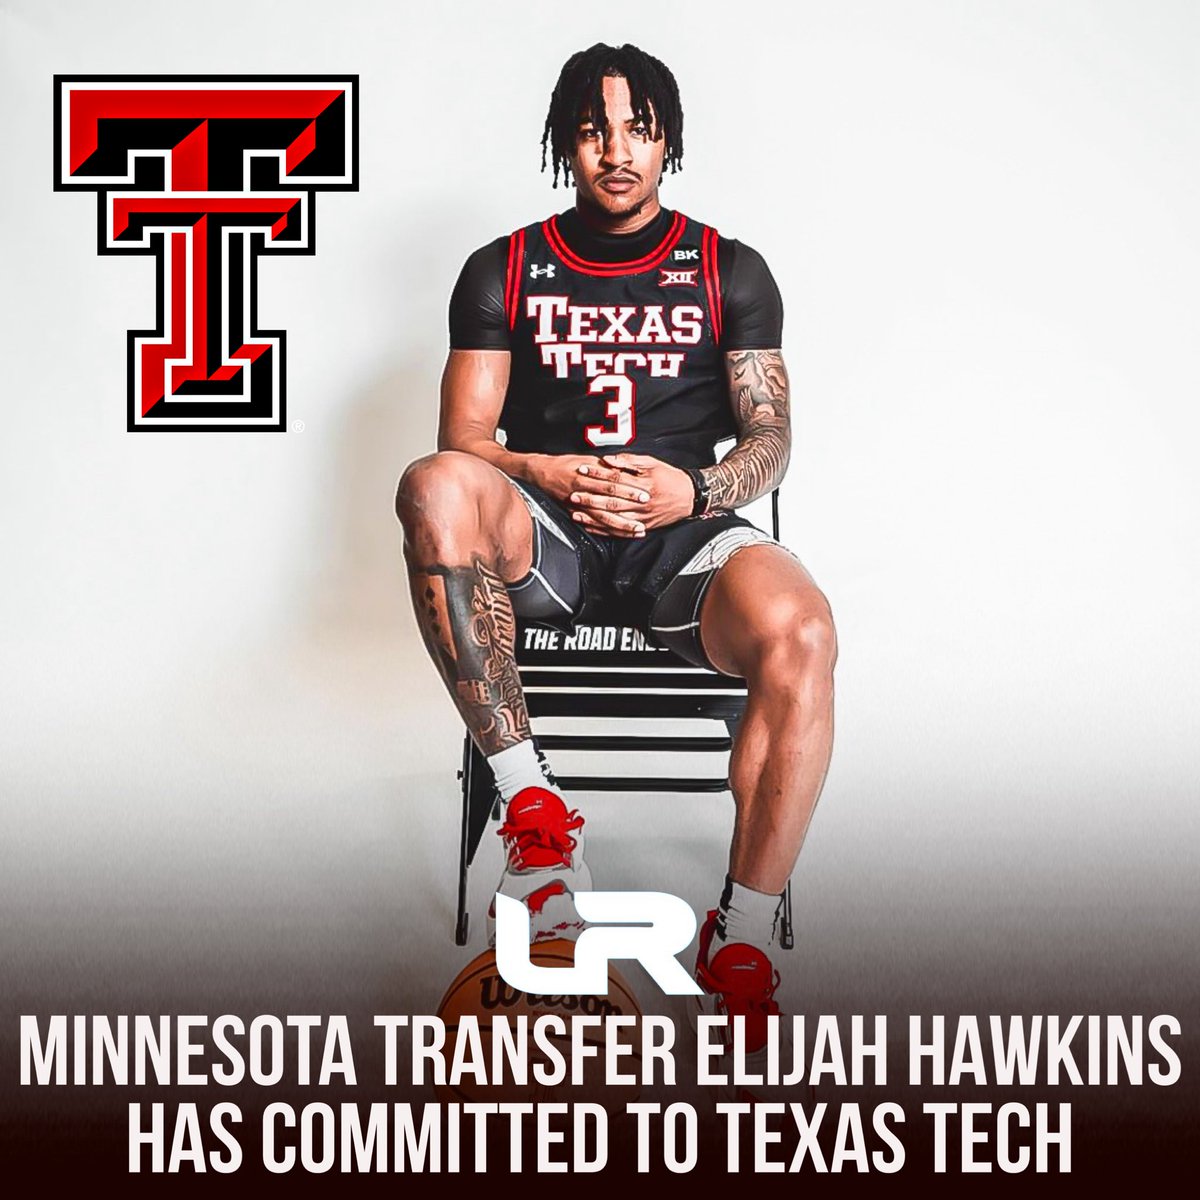 NEWS: Minnesota transfer Elijah Hawkins has committed to Texas Tech, a source confirmed to @LeagueRDY. @TiptonEdits was first. Hawkins began his career playing two seasons at Howard before spending last season at Minnesota. He’s a native of Washington, DC. He averaged 9.5PPG,